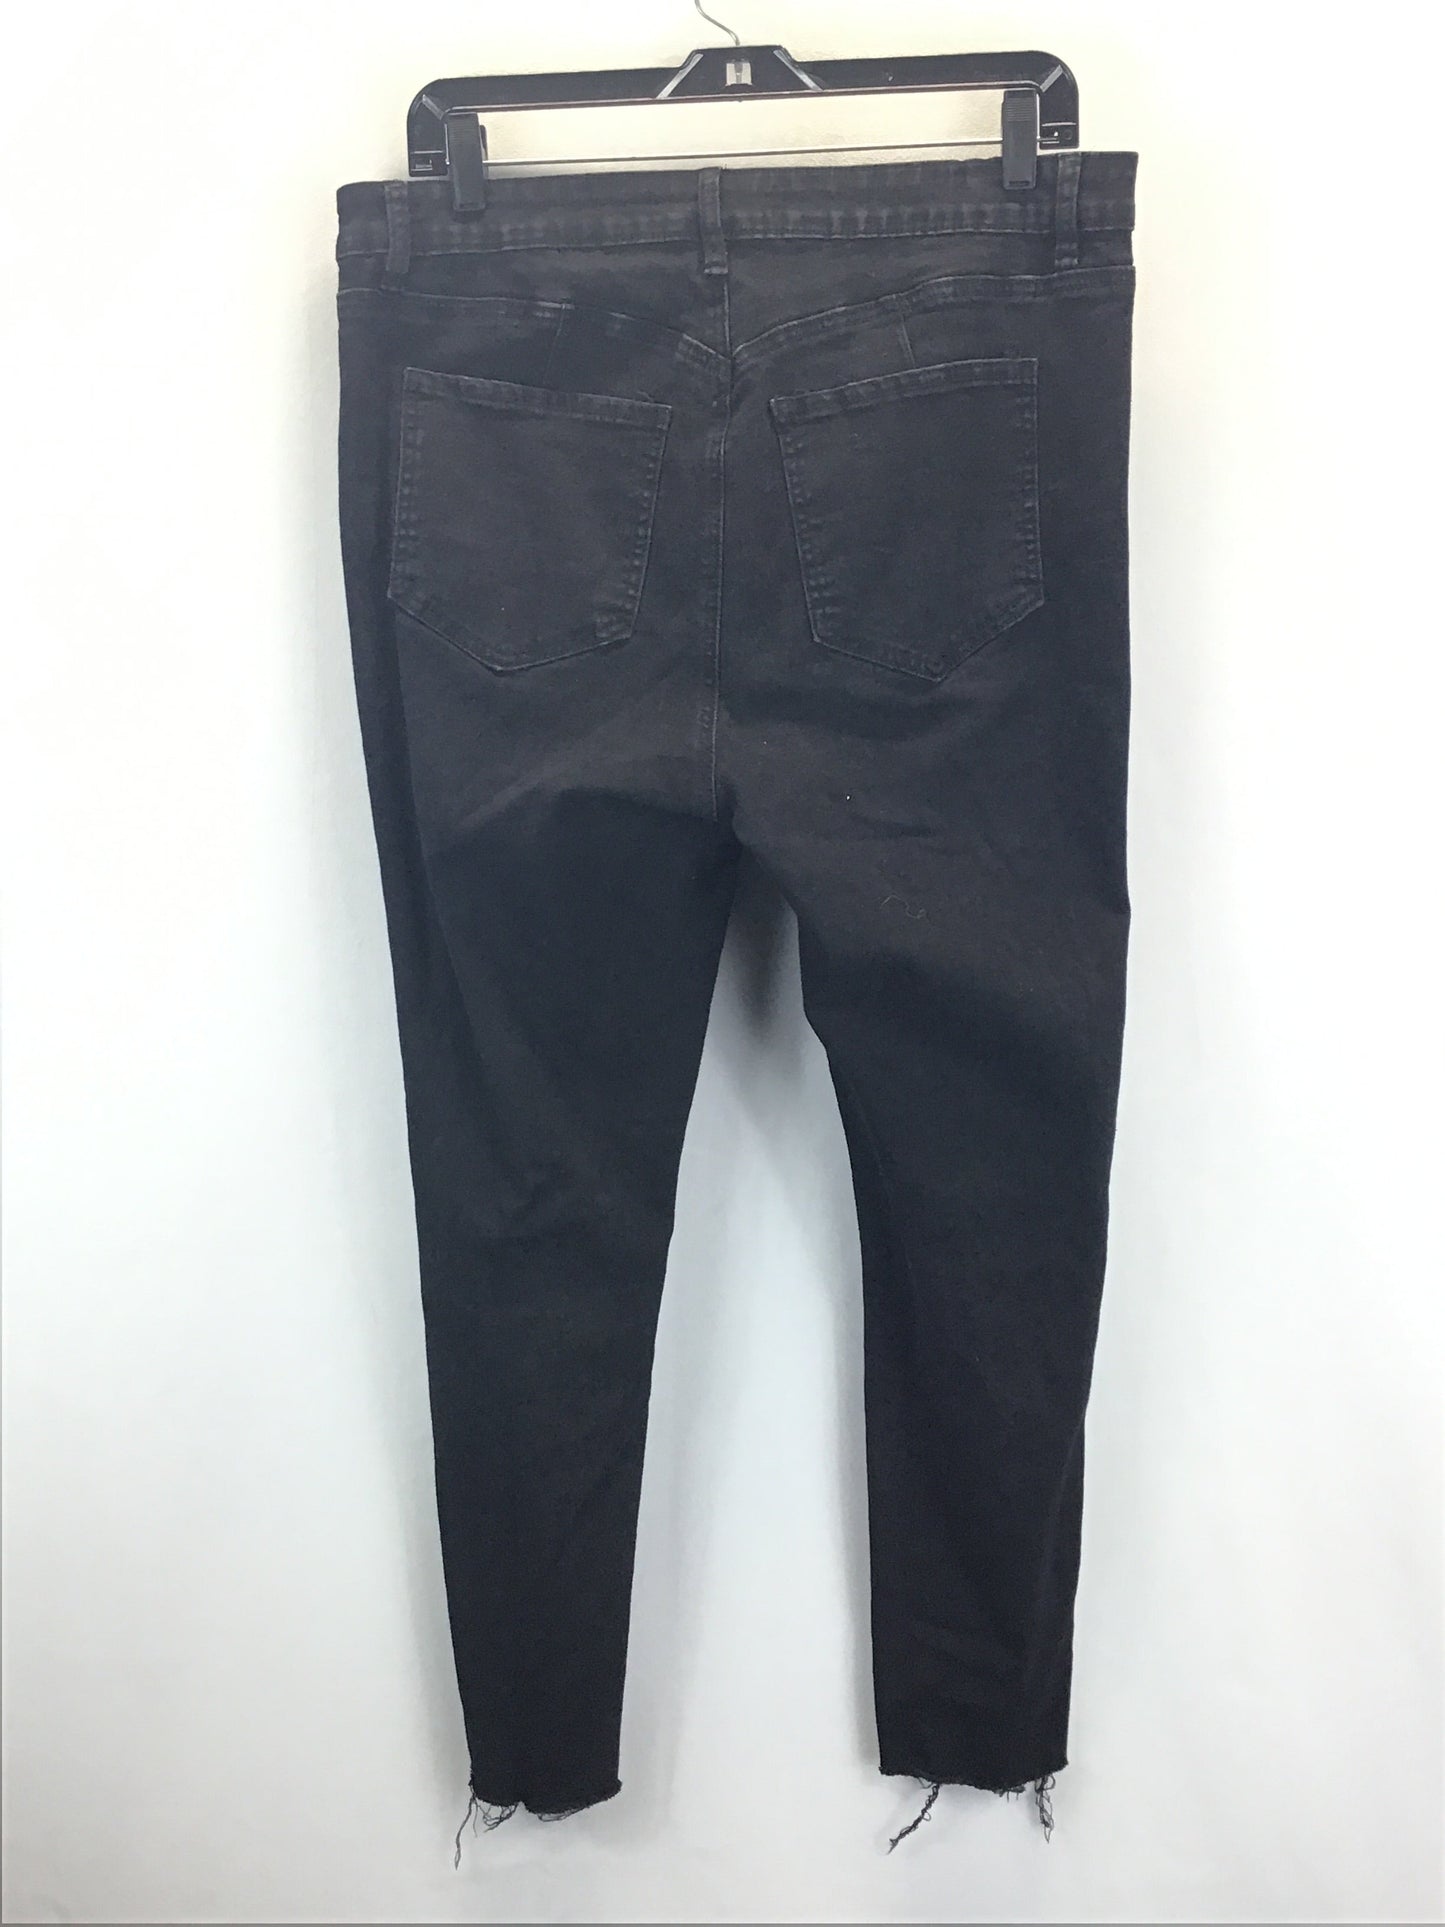 Black Jeans Skinny Clothes Mentor, Size 16